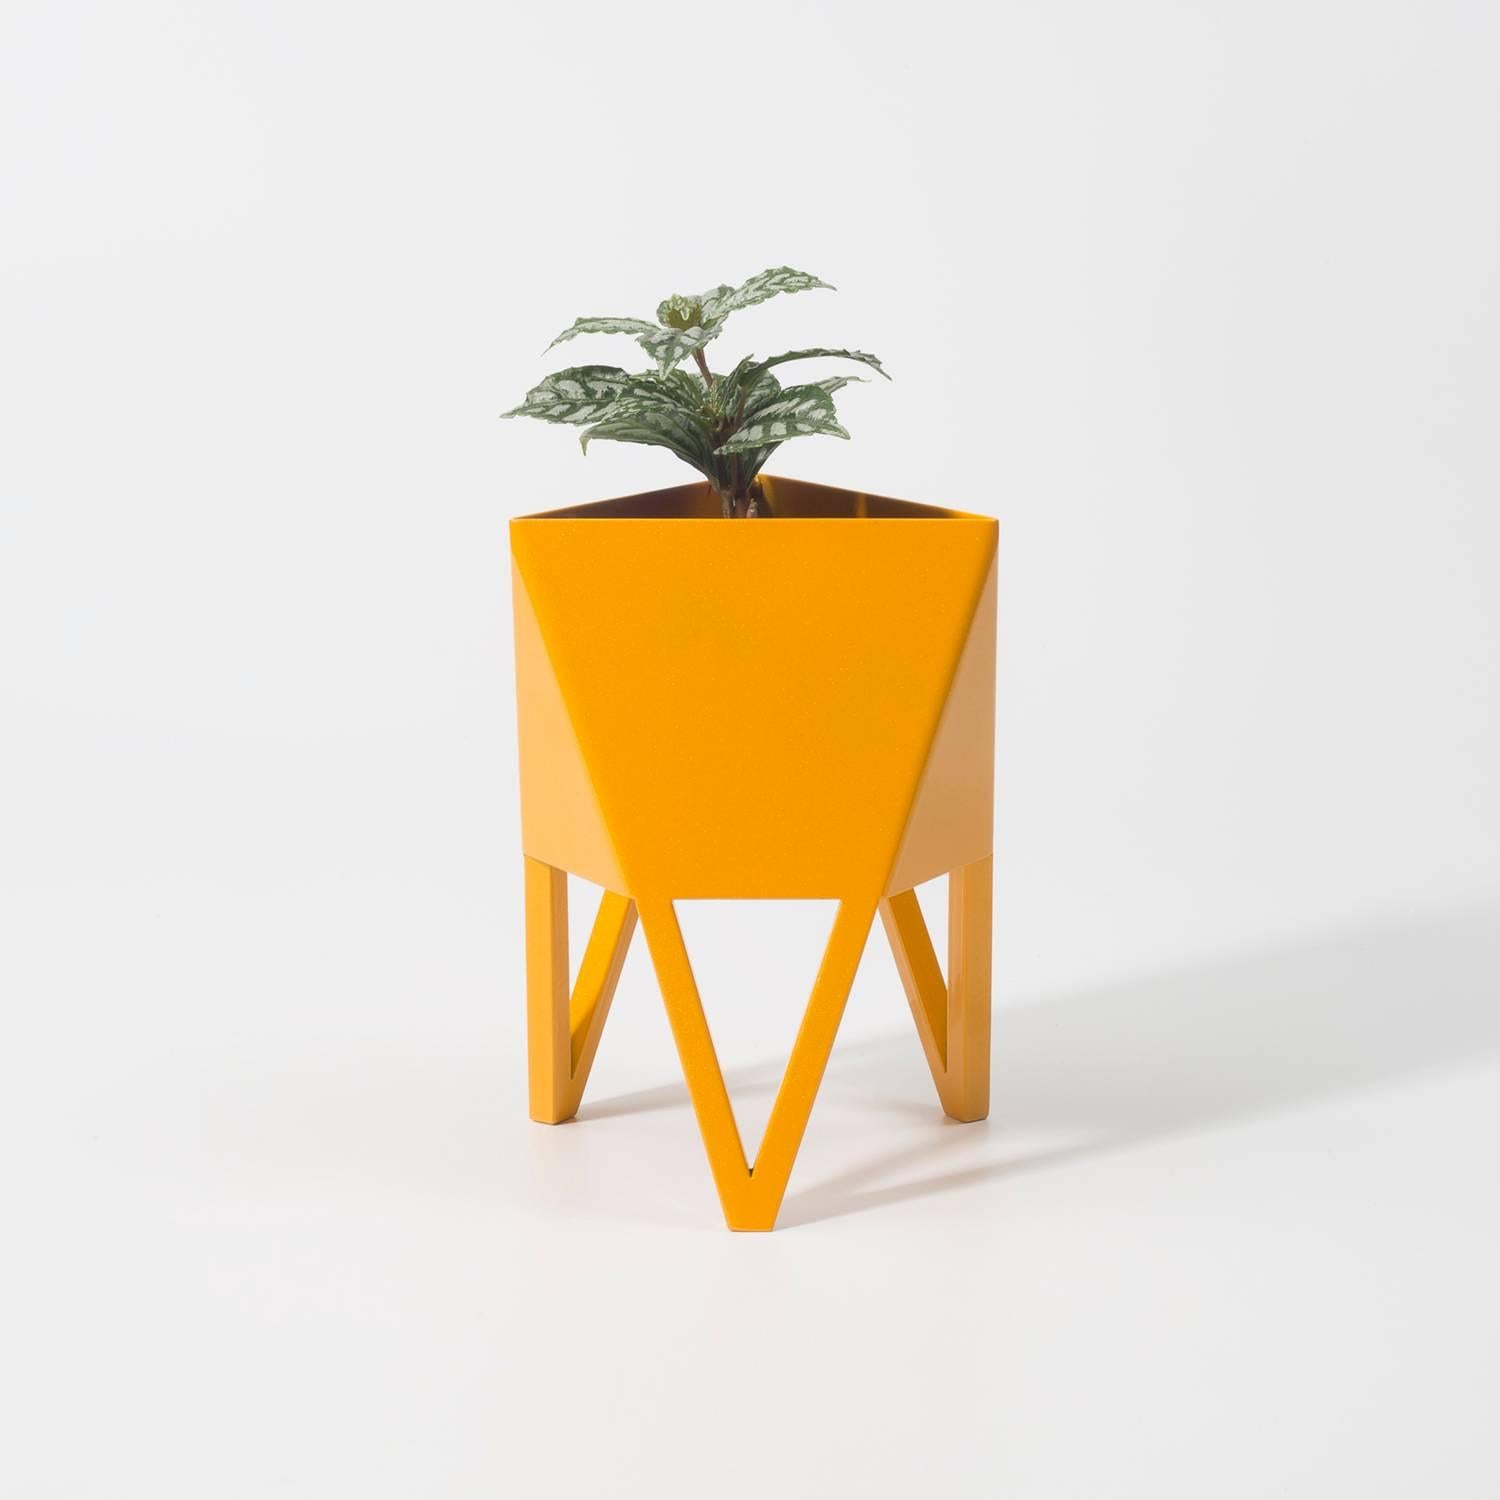 Deca Planter in Pastel Green Steel, Large, by Force/Collide 6